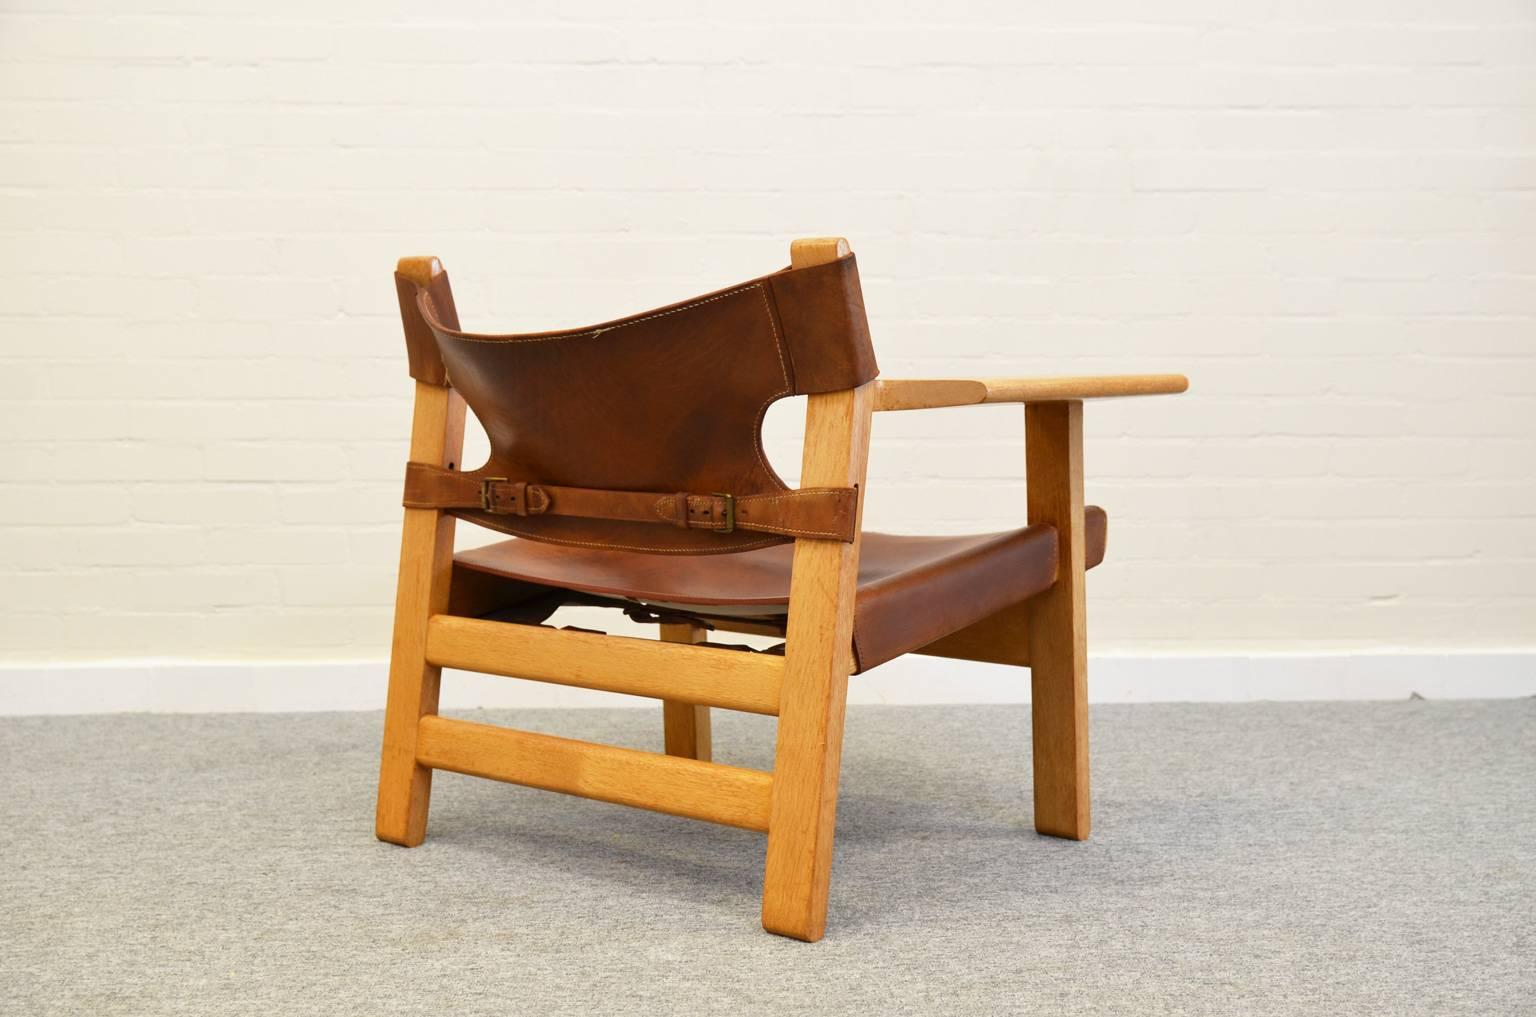 Mogensen designed the Spanish chair in 1959 for Fredericia Furniture and was inspired by traditional Spanish furniture. The Spanish chair or model 2226 is robust, Classic and timeless with simple, straight lines, made of solid materials as oak and